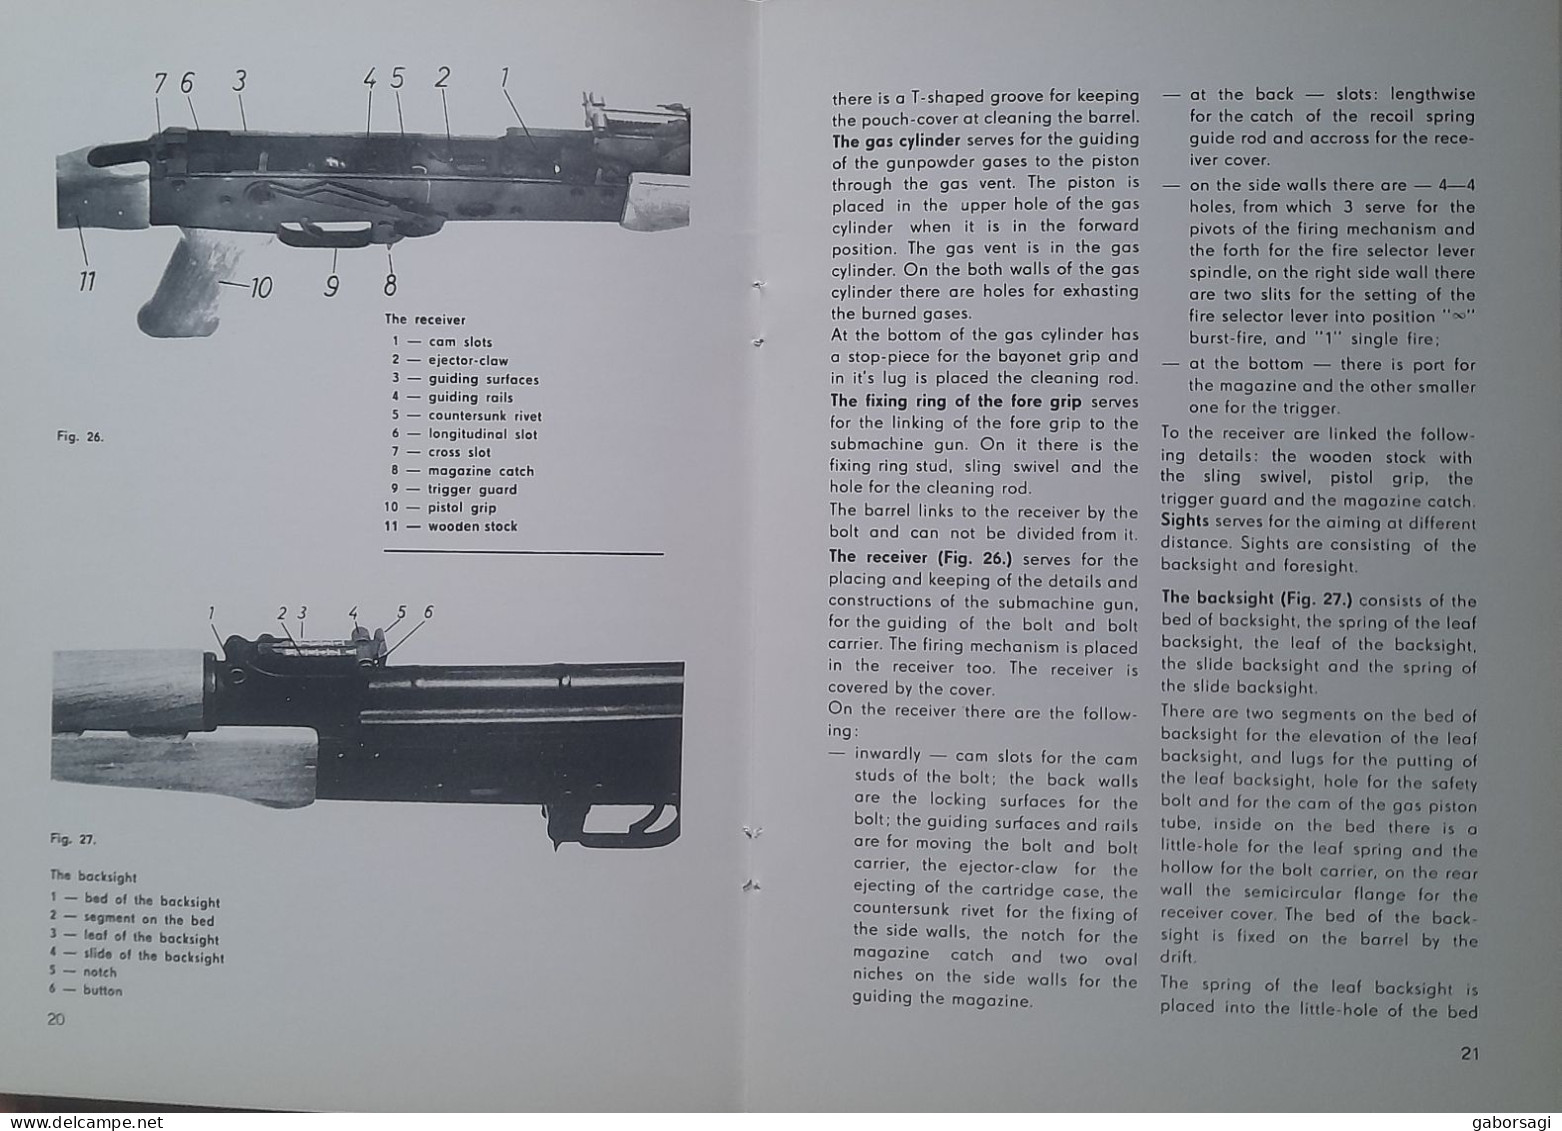 General Descriptions and handling instruction of the 7.62 mm Submachine Gun with wooden stock type Kalashnikov